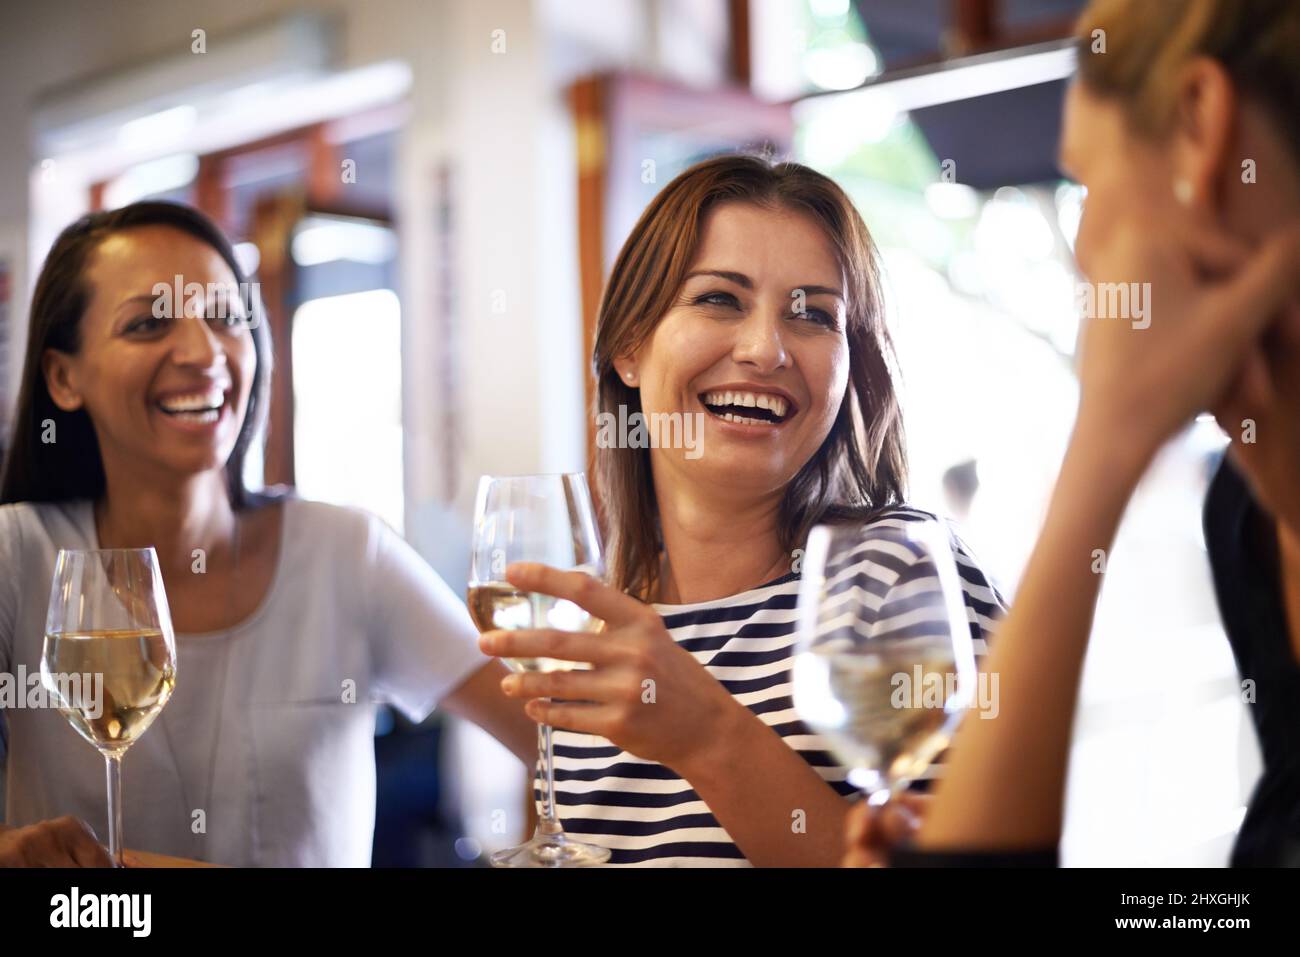 The girls celebrating with a glass of wine. Cropped shot of three women enjoying a glass of white wine. Stock Photo